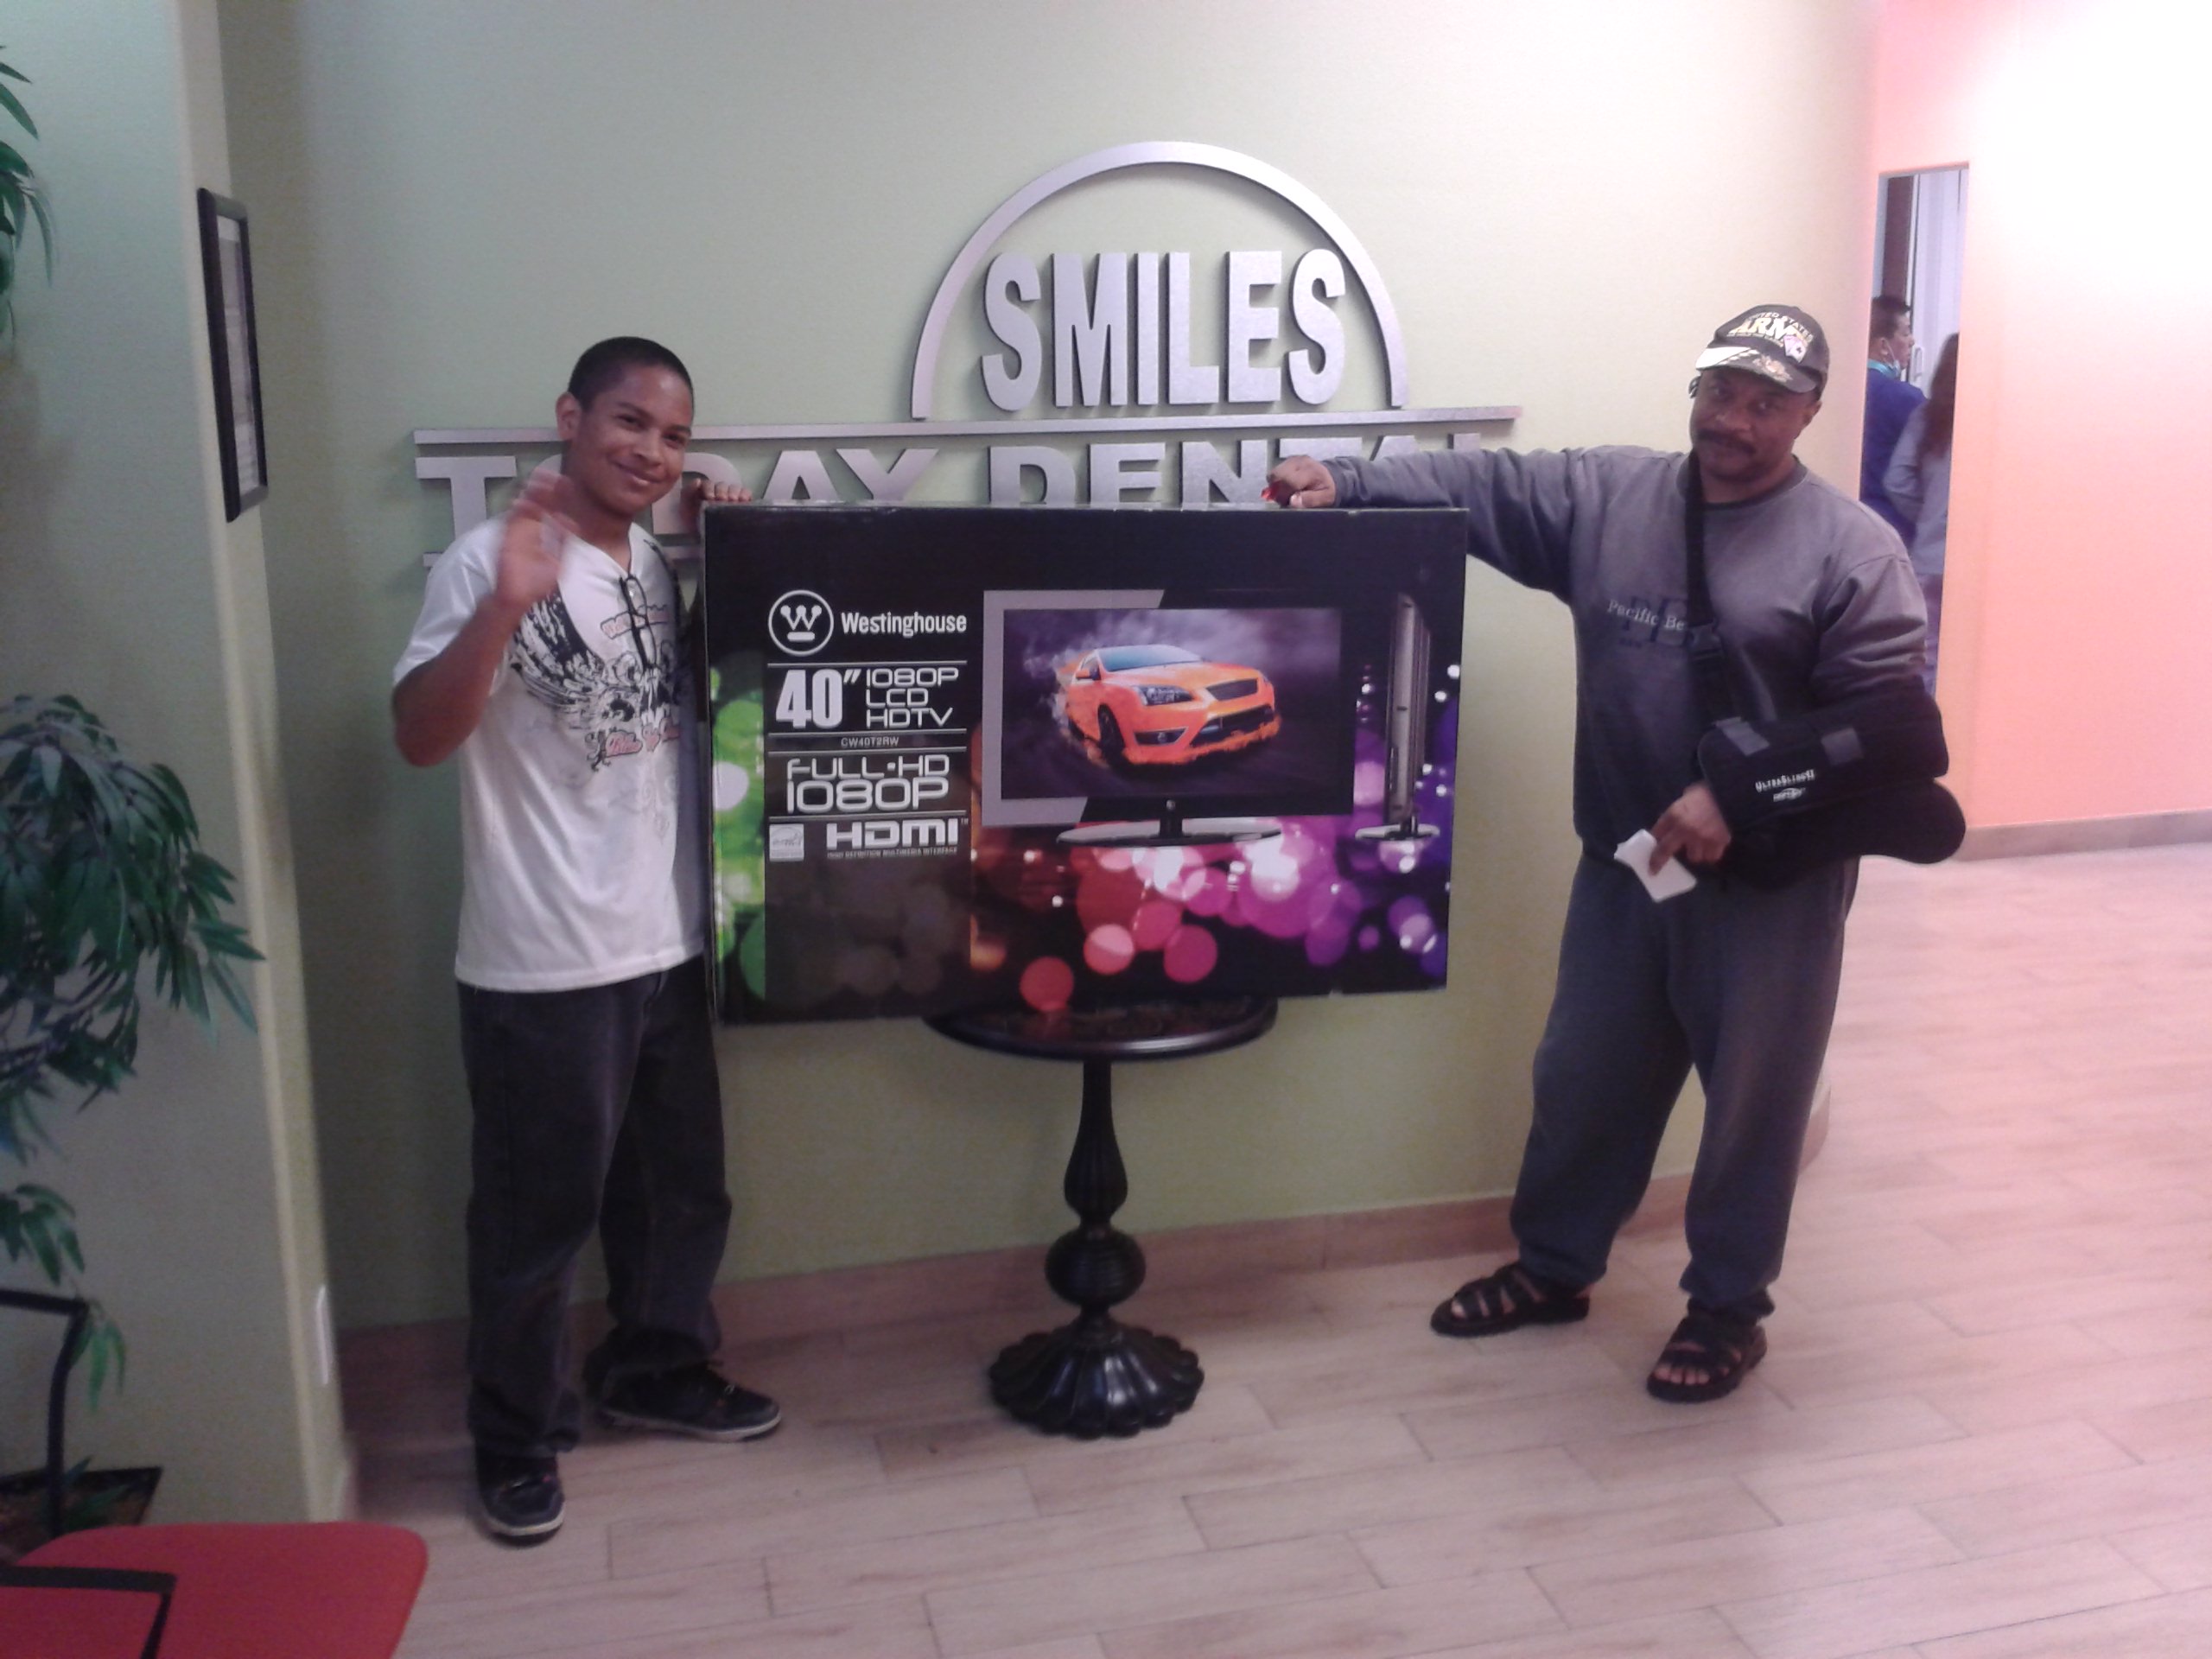 Smiles today contest winner of may 24th